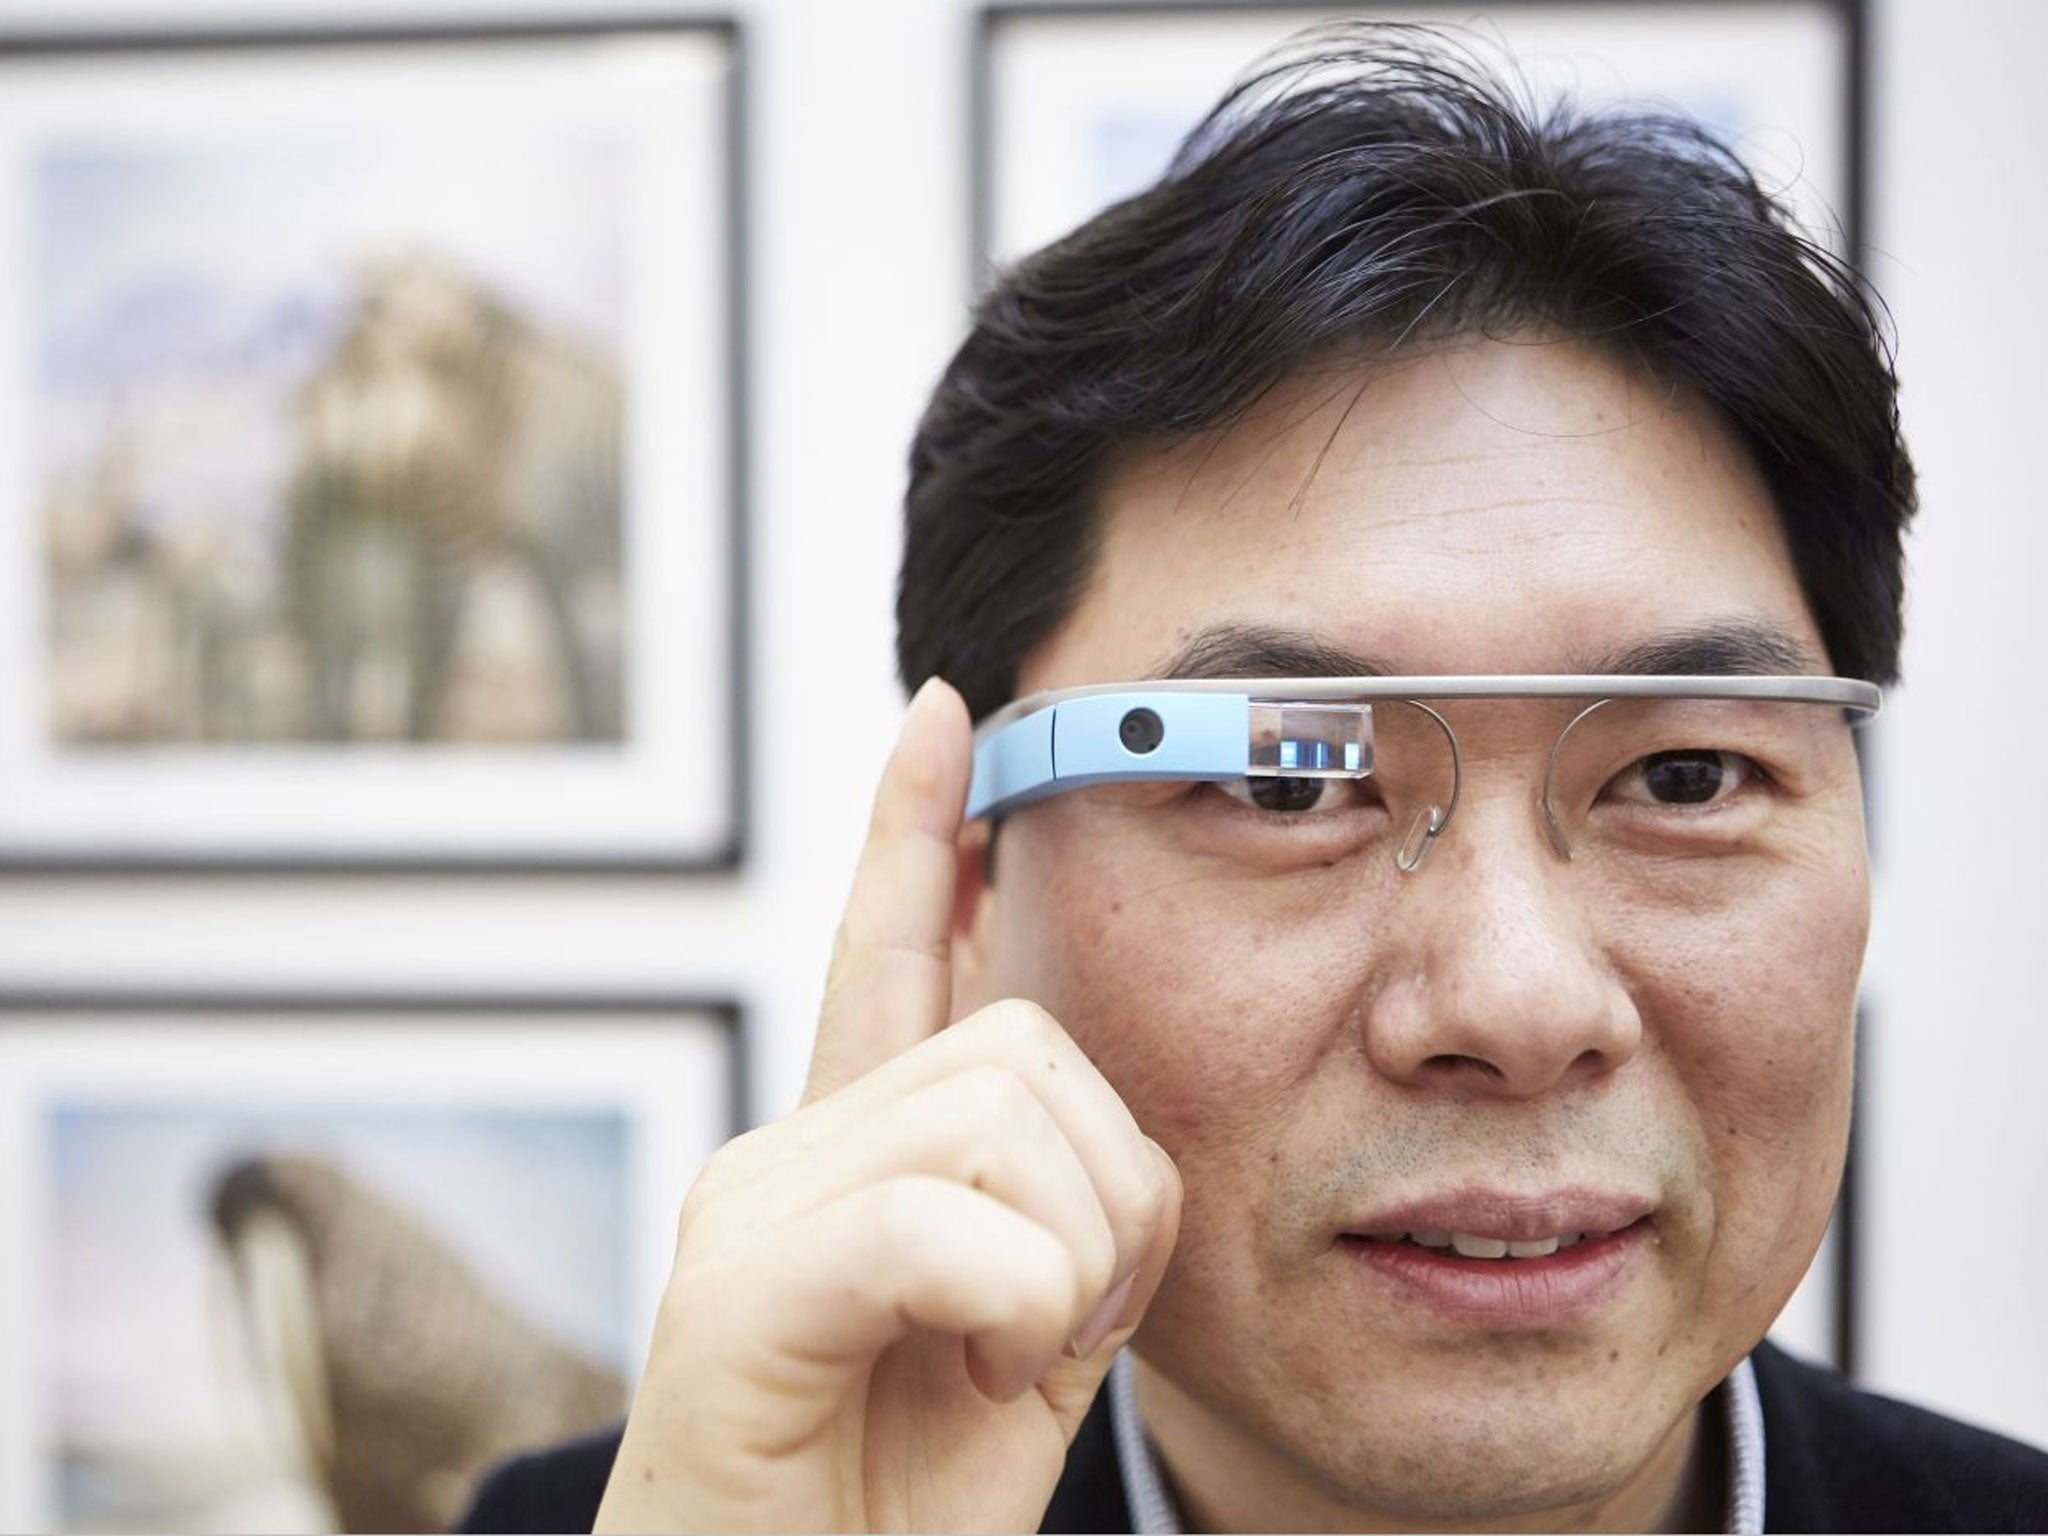 Dr Timothy Jung, wearing Google’s device, sees Glass as the ‘future of tourism’